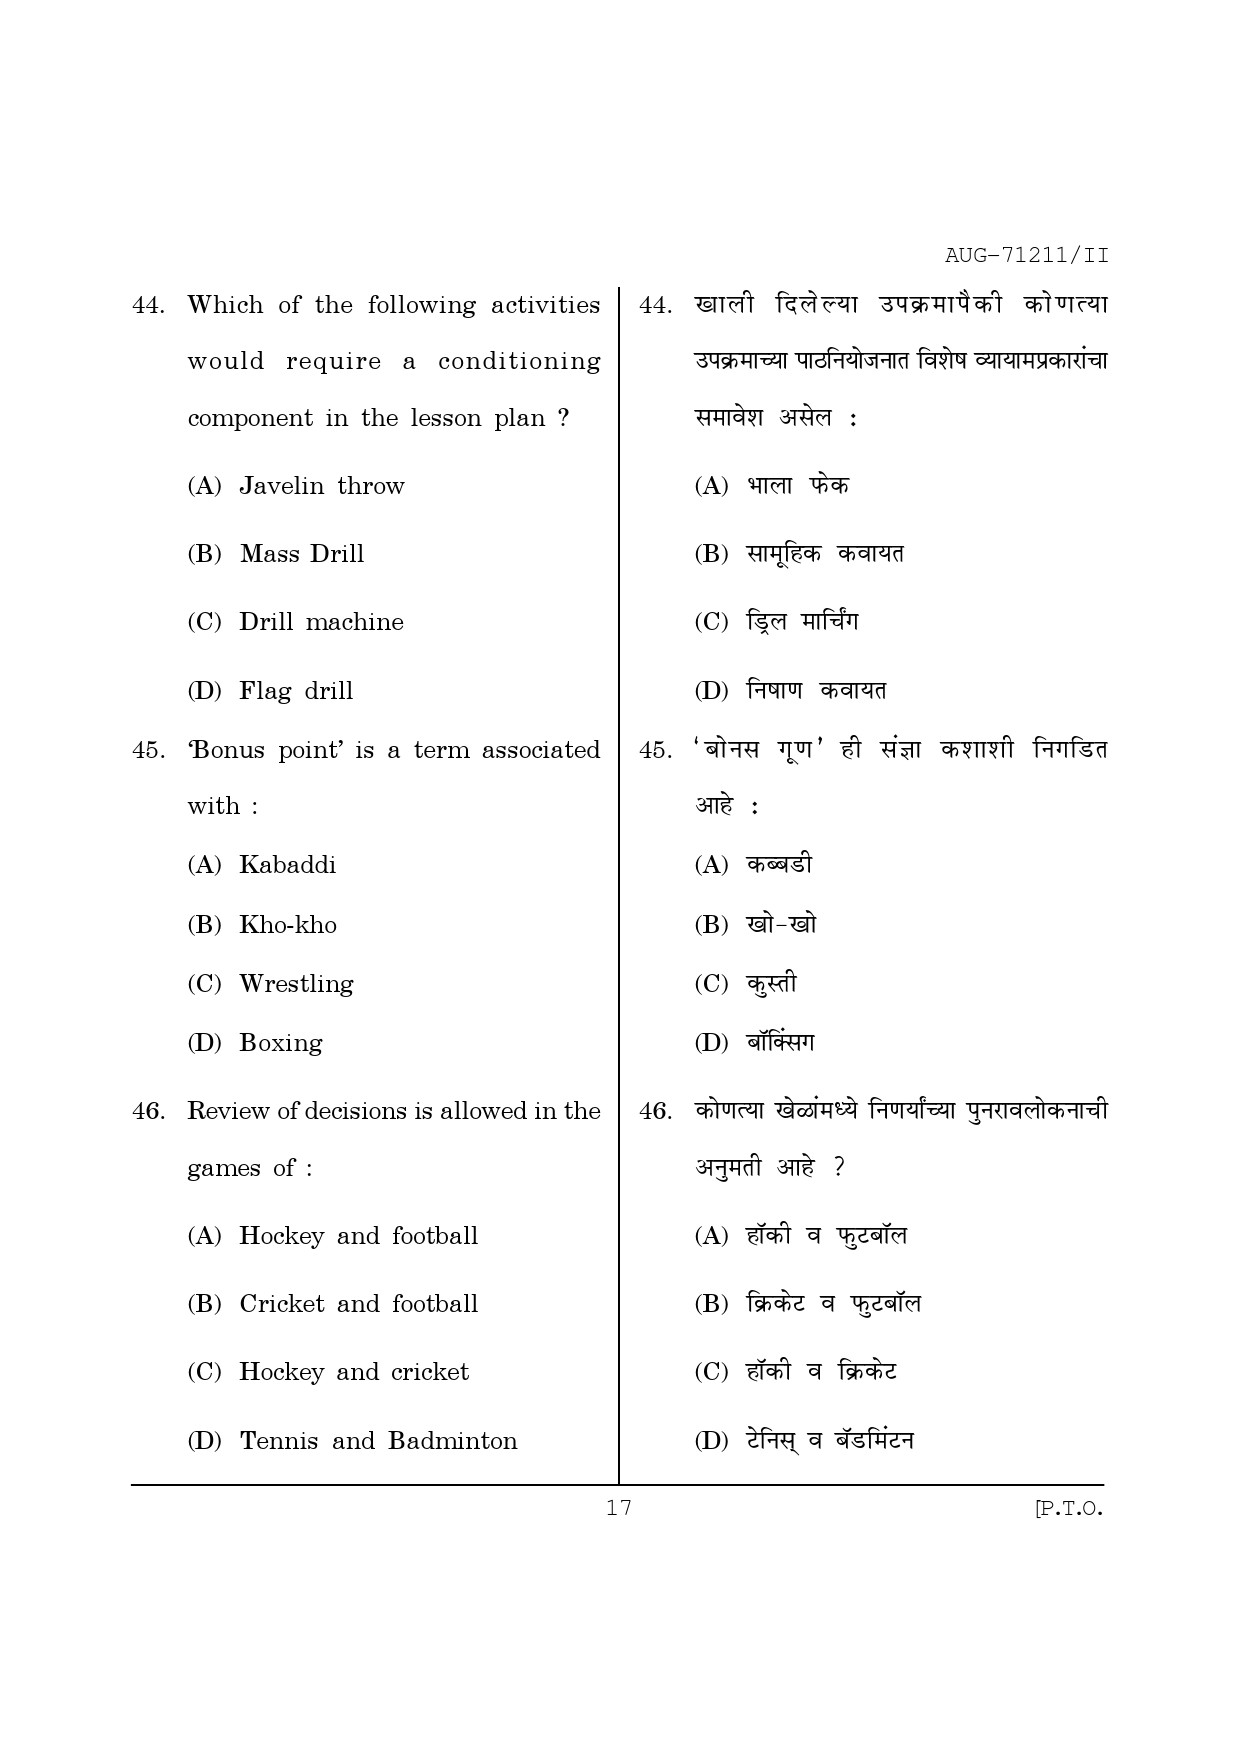 Maharashtra SET Physical Education Question Paper II August 2011 17